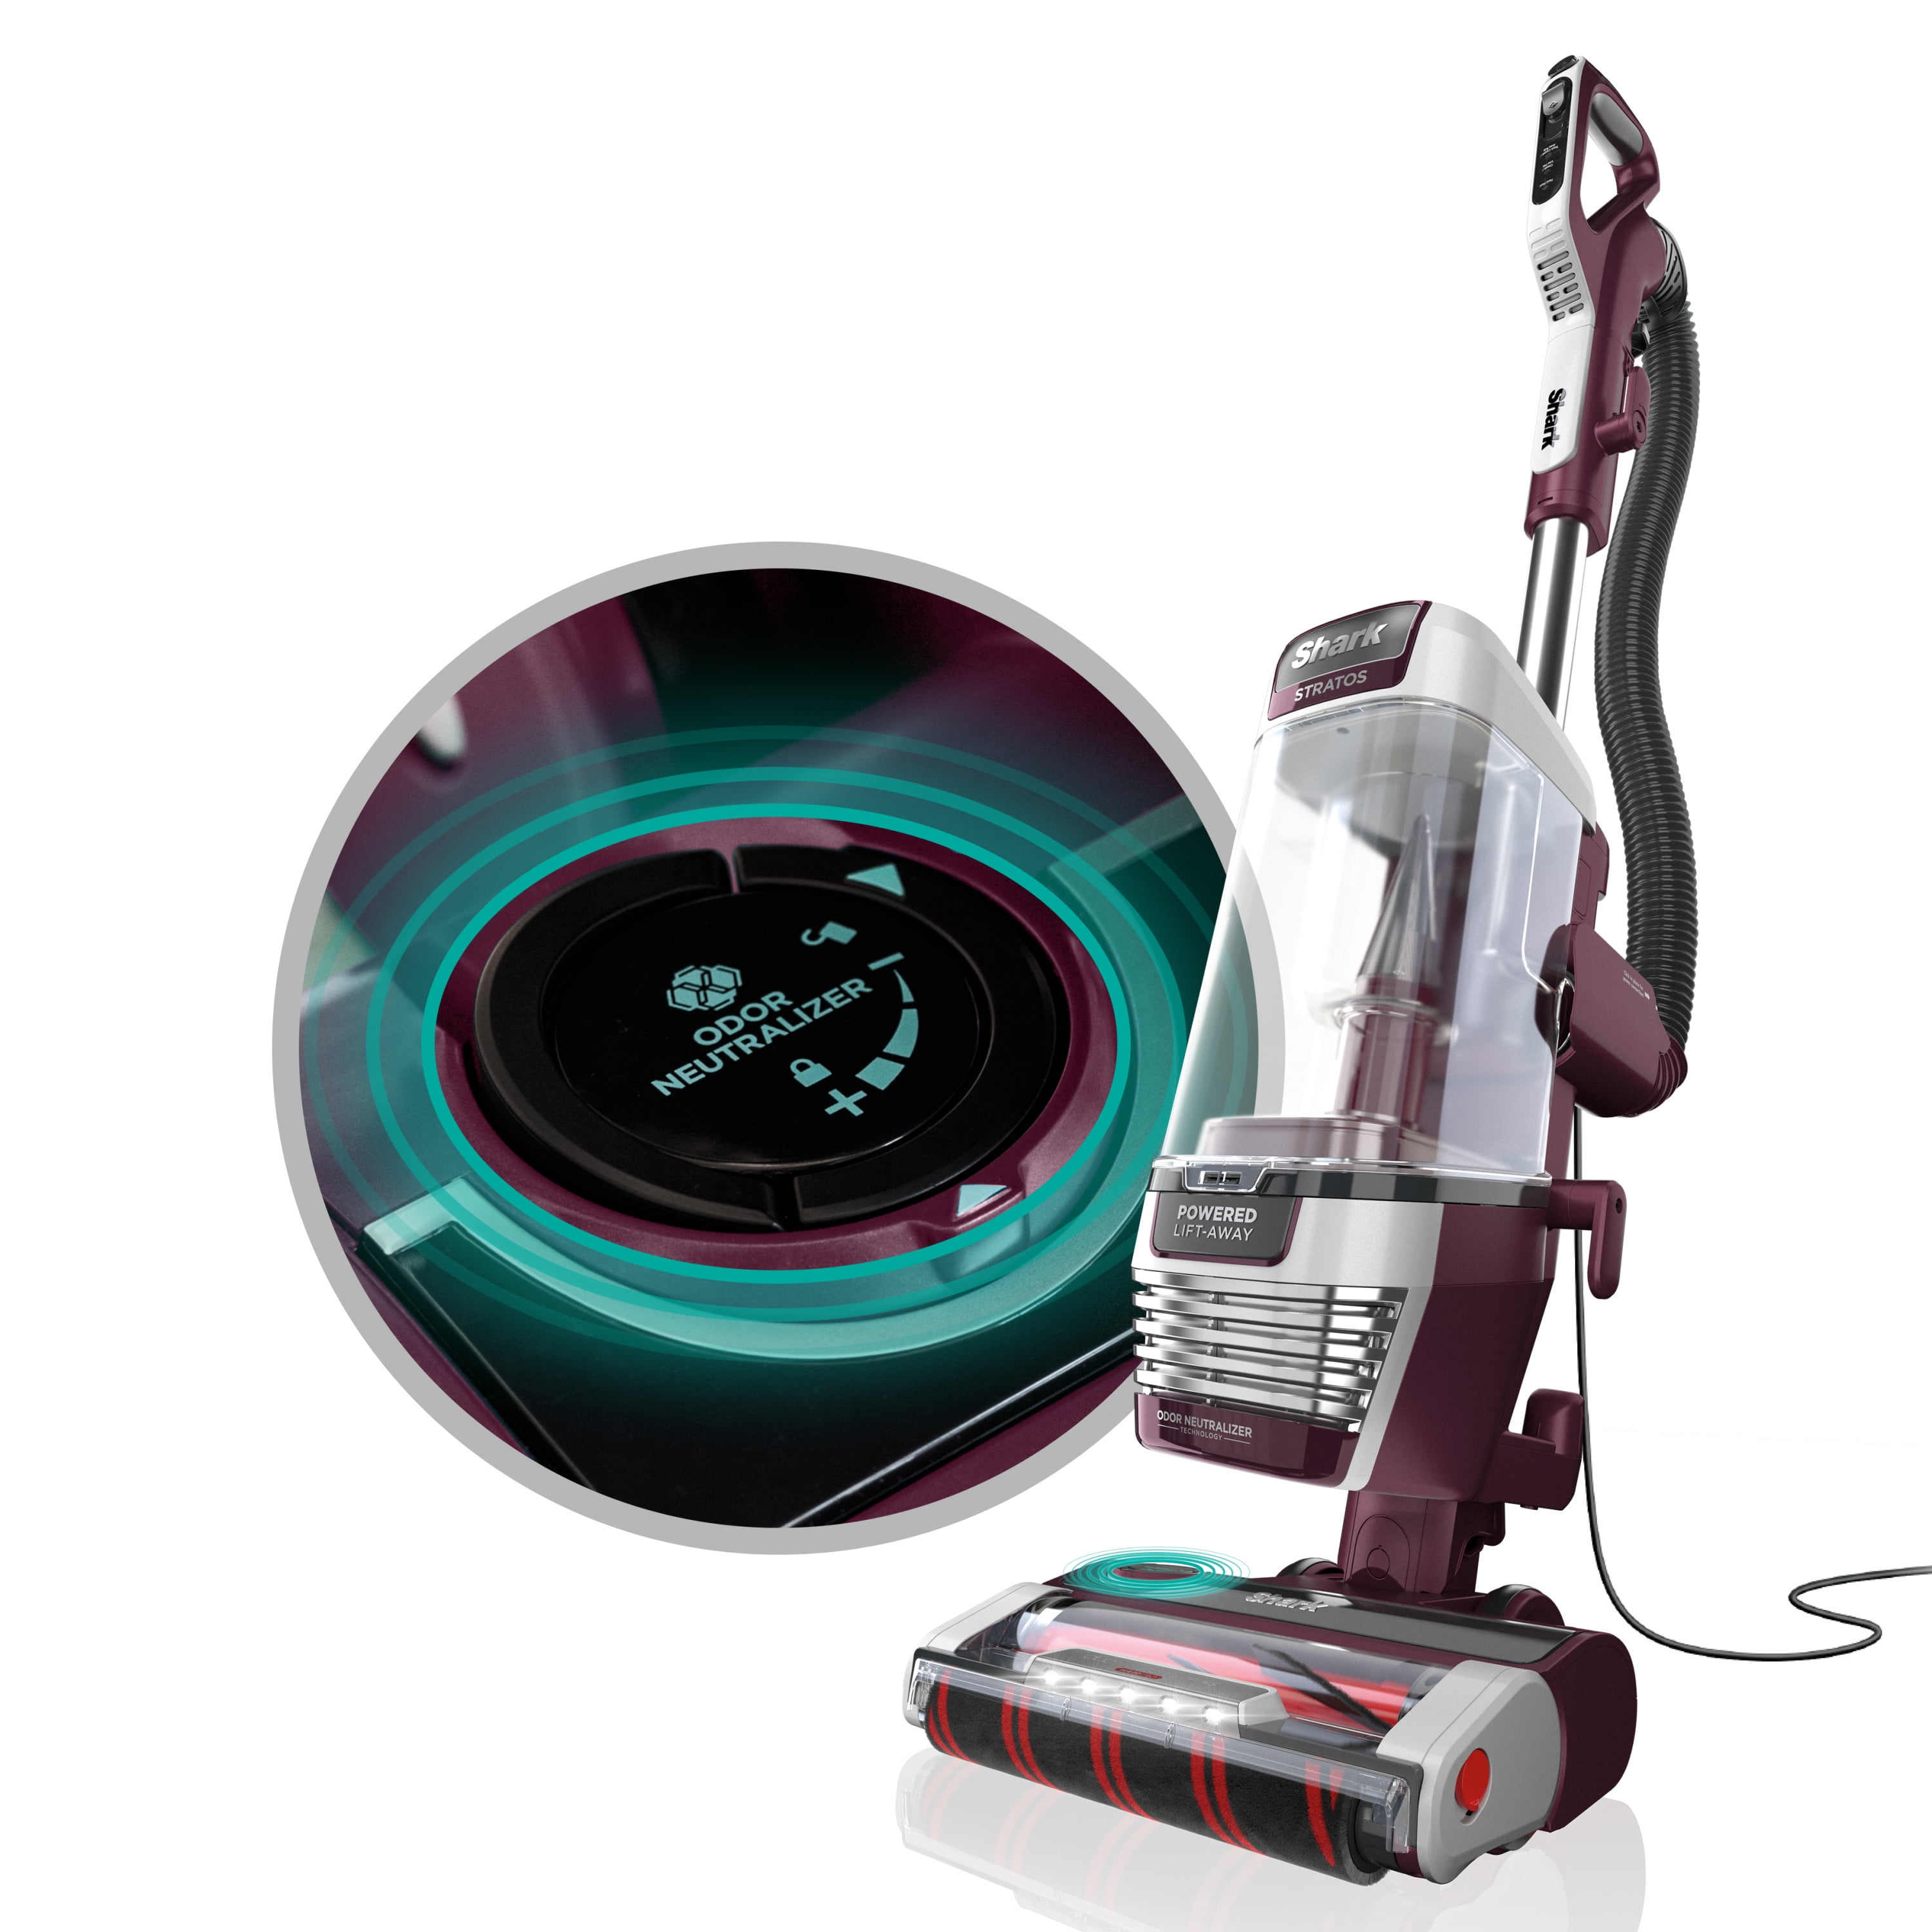 Four A for the new Hoover vacuum cleaners - Home Appliances World